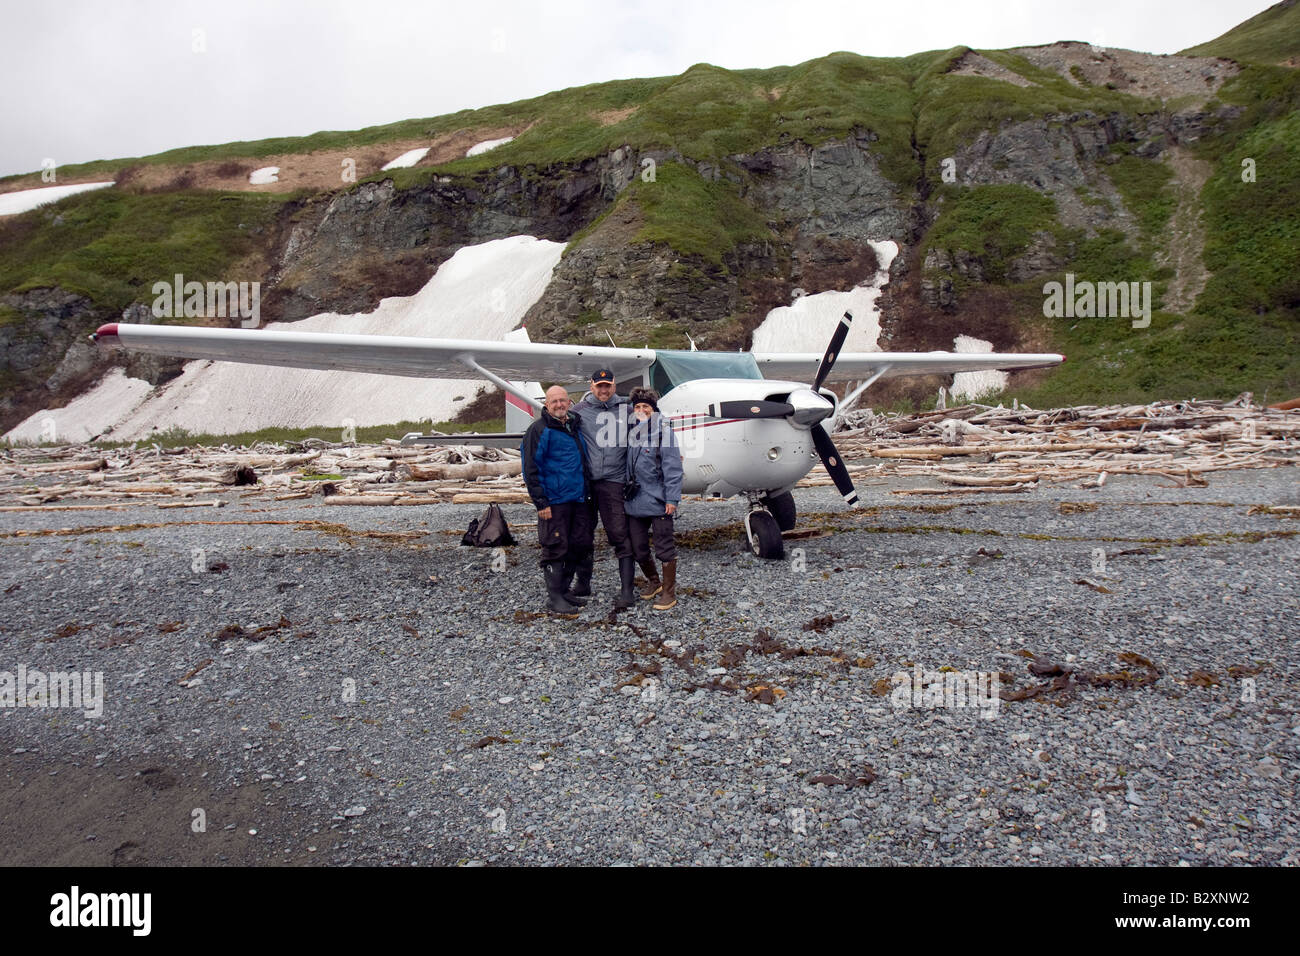 Tourists in front of small airplane that brought them to a driftwood covered beach in Katmai National Park and Preserve. Stock Photo